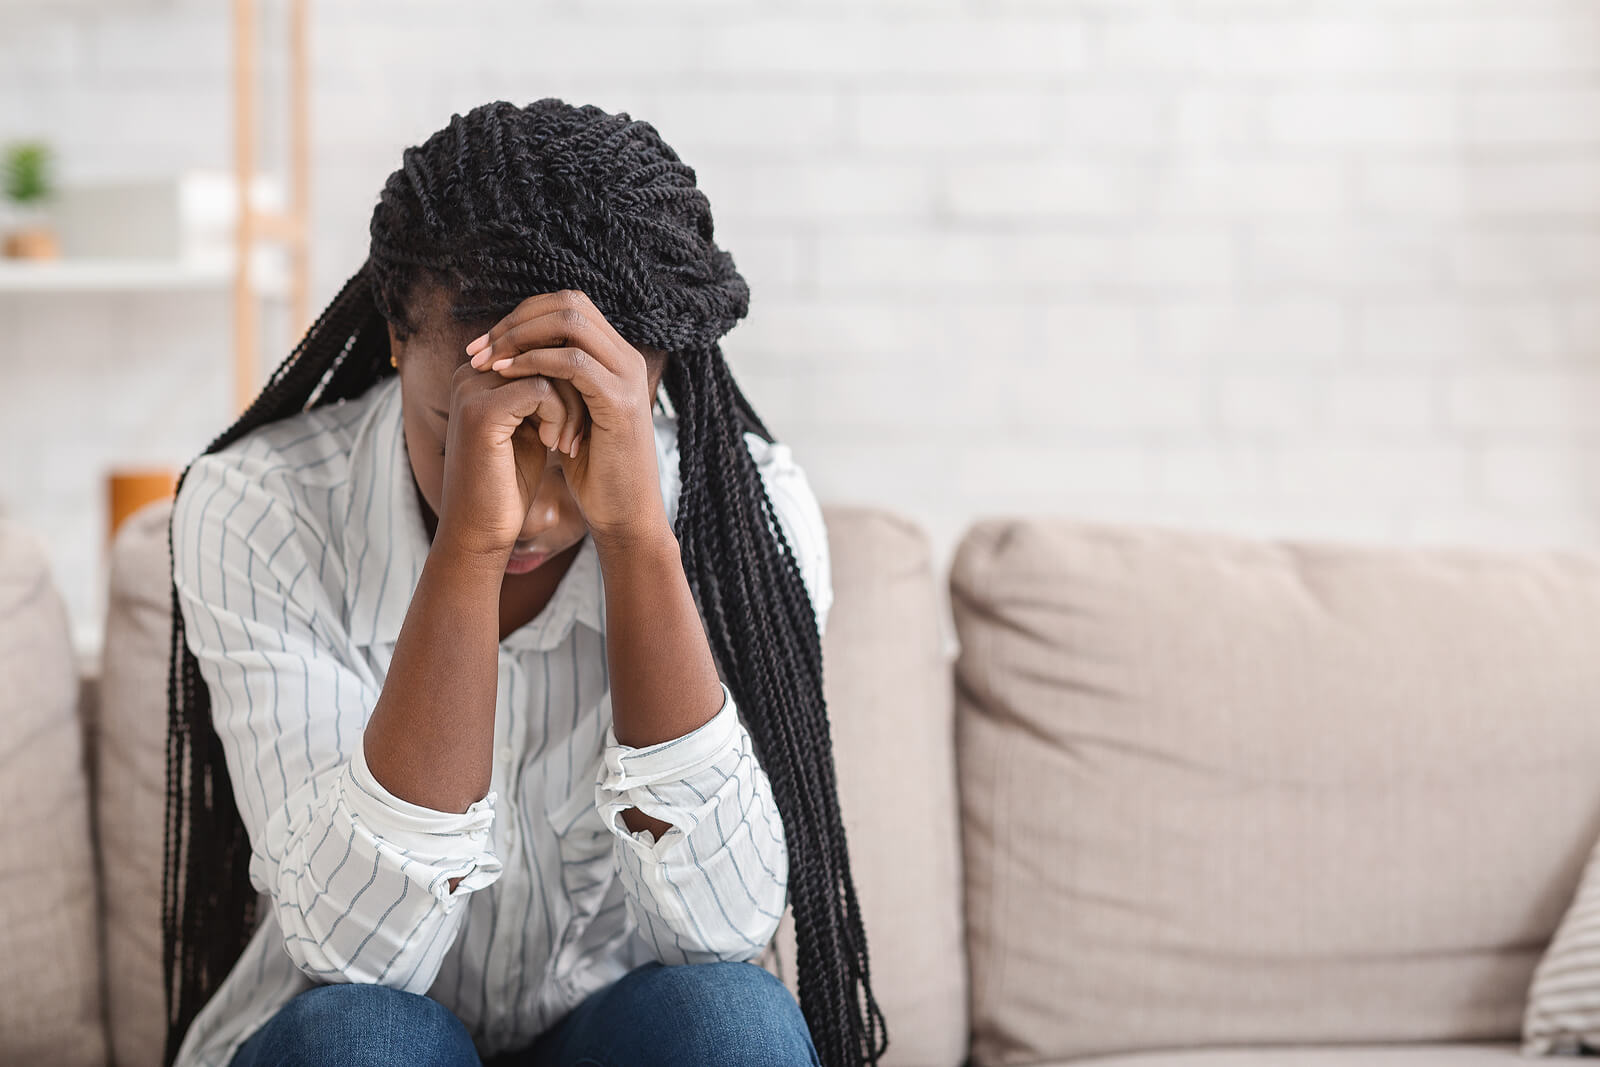 A woman touches her hands to her head while sitting on the couch. This could represent the stress young adults face that black therapists in Brooklyn, NY can address. Learn more about therapy for young adults in Brooklyn, NY by contacting a black therapist in Brooklyn, NY today.